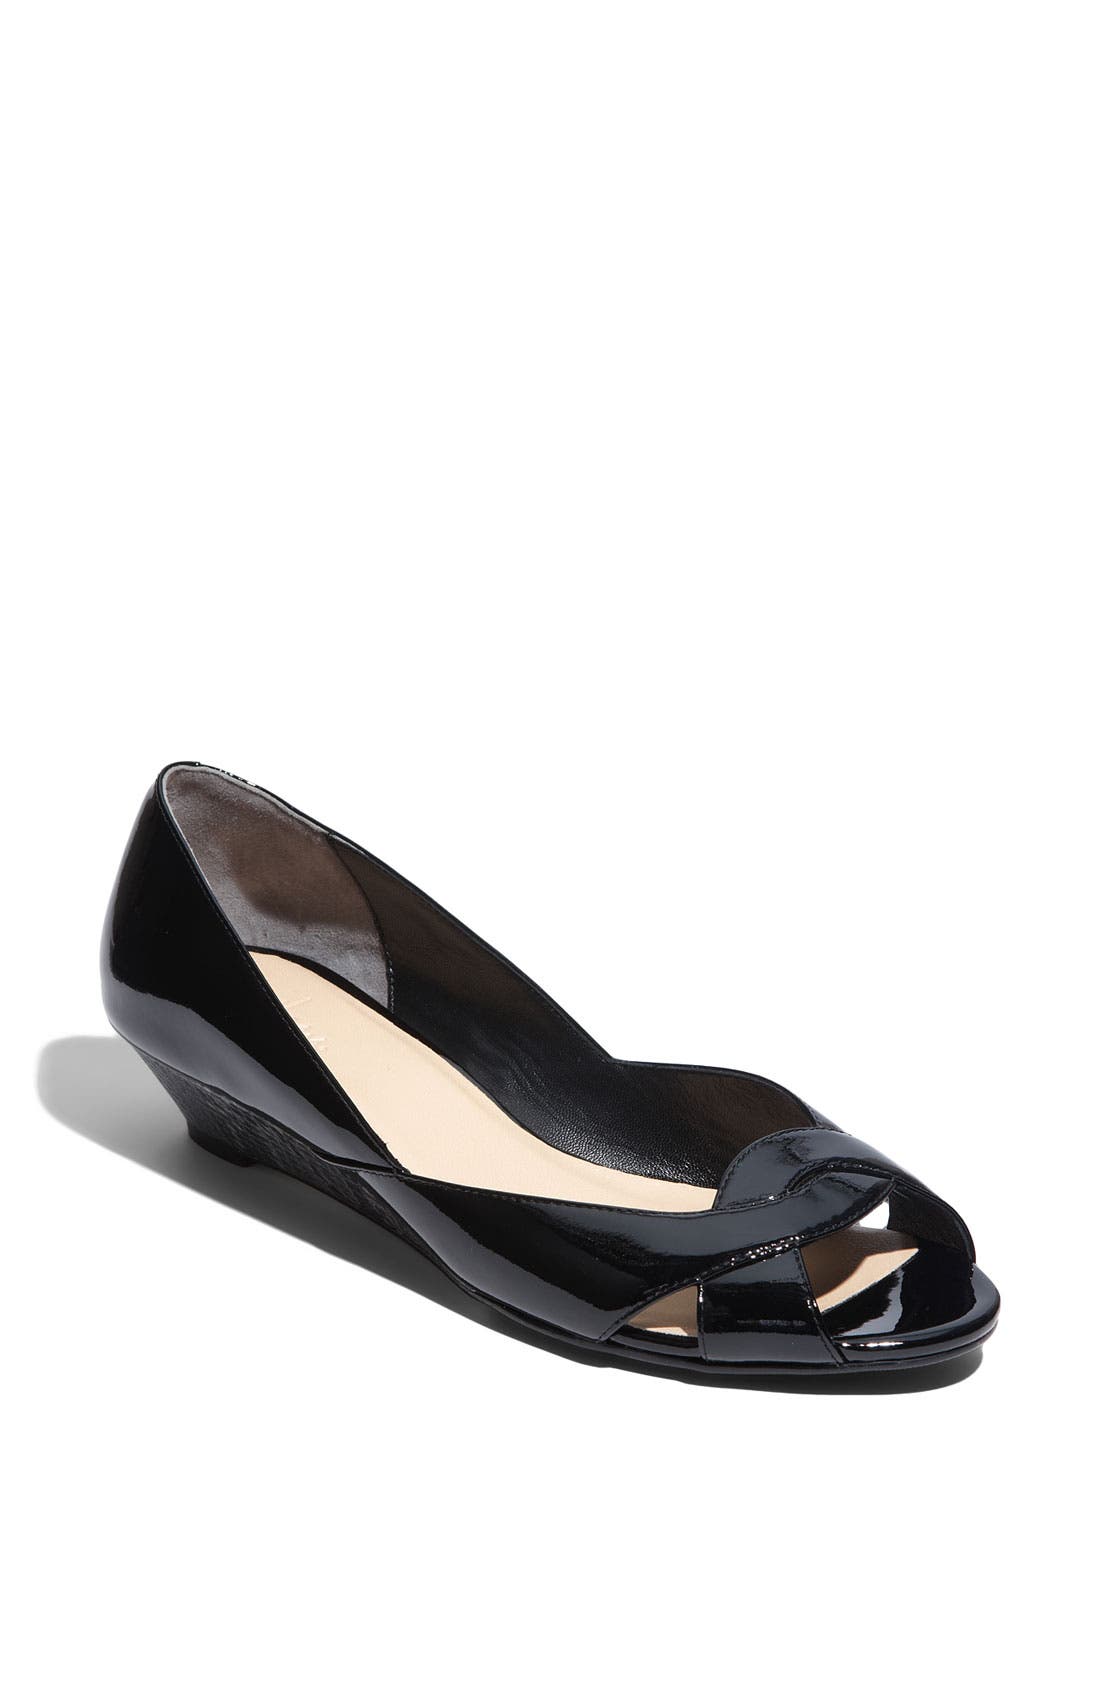 cole haan open toe shoes